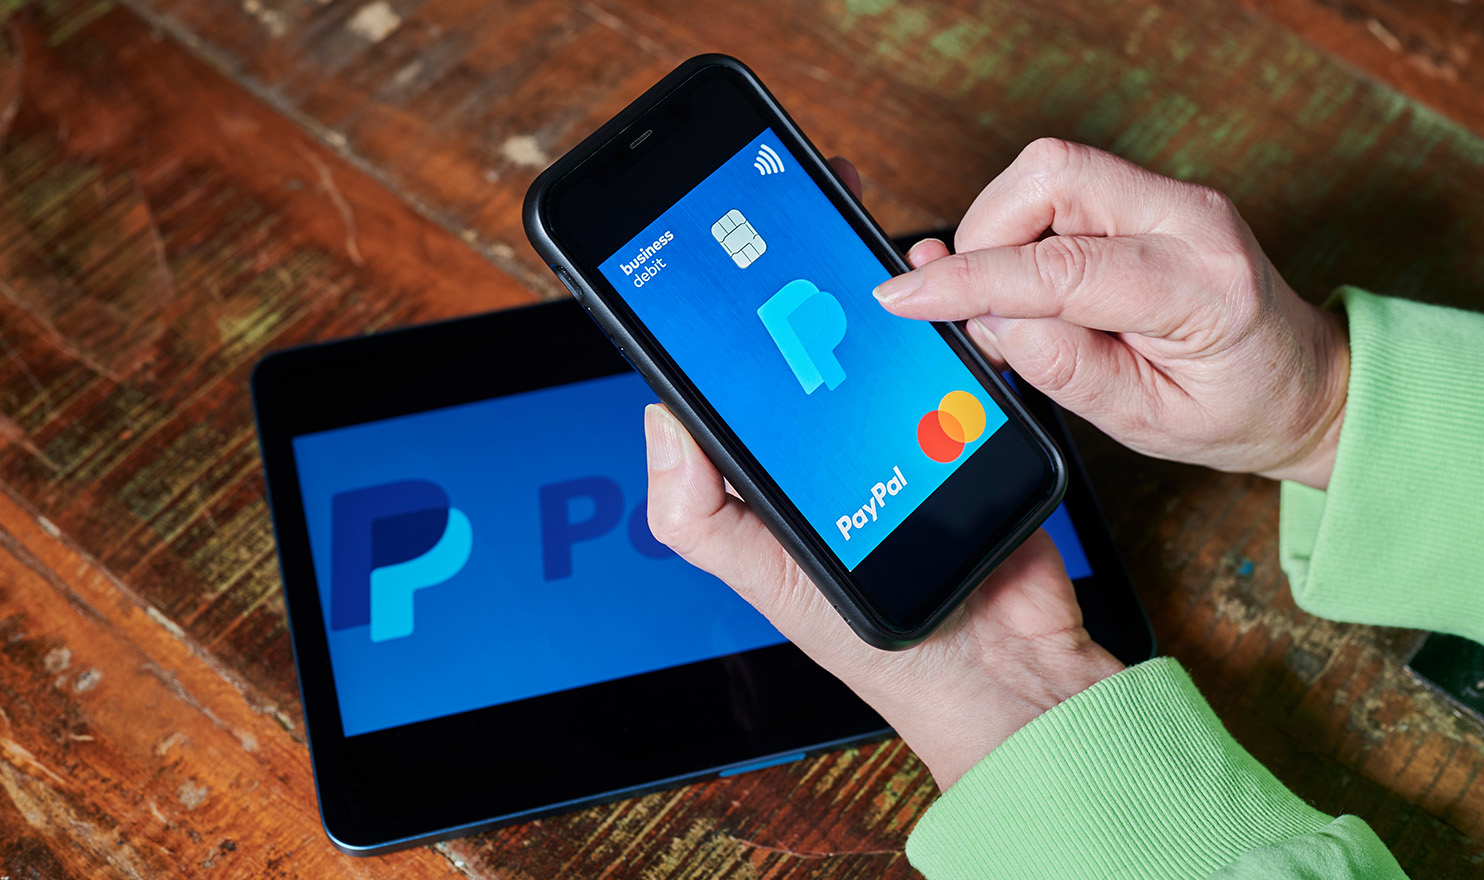 A person is using PayPal on their mobile device and tablet.